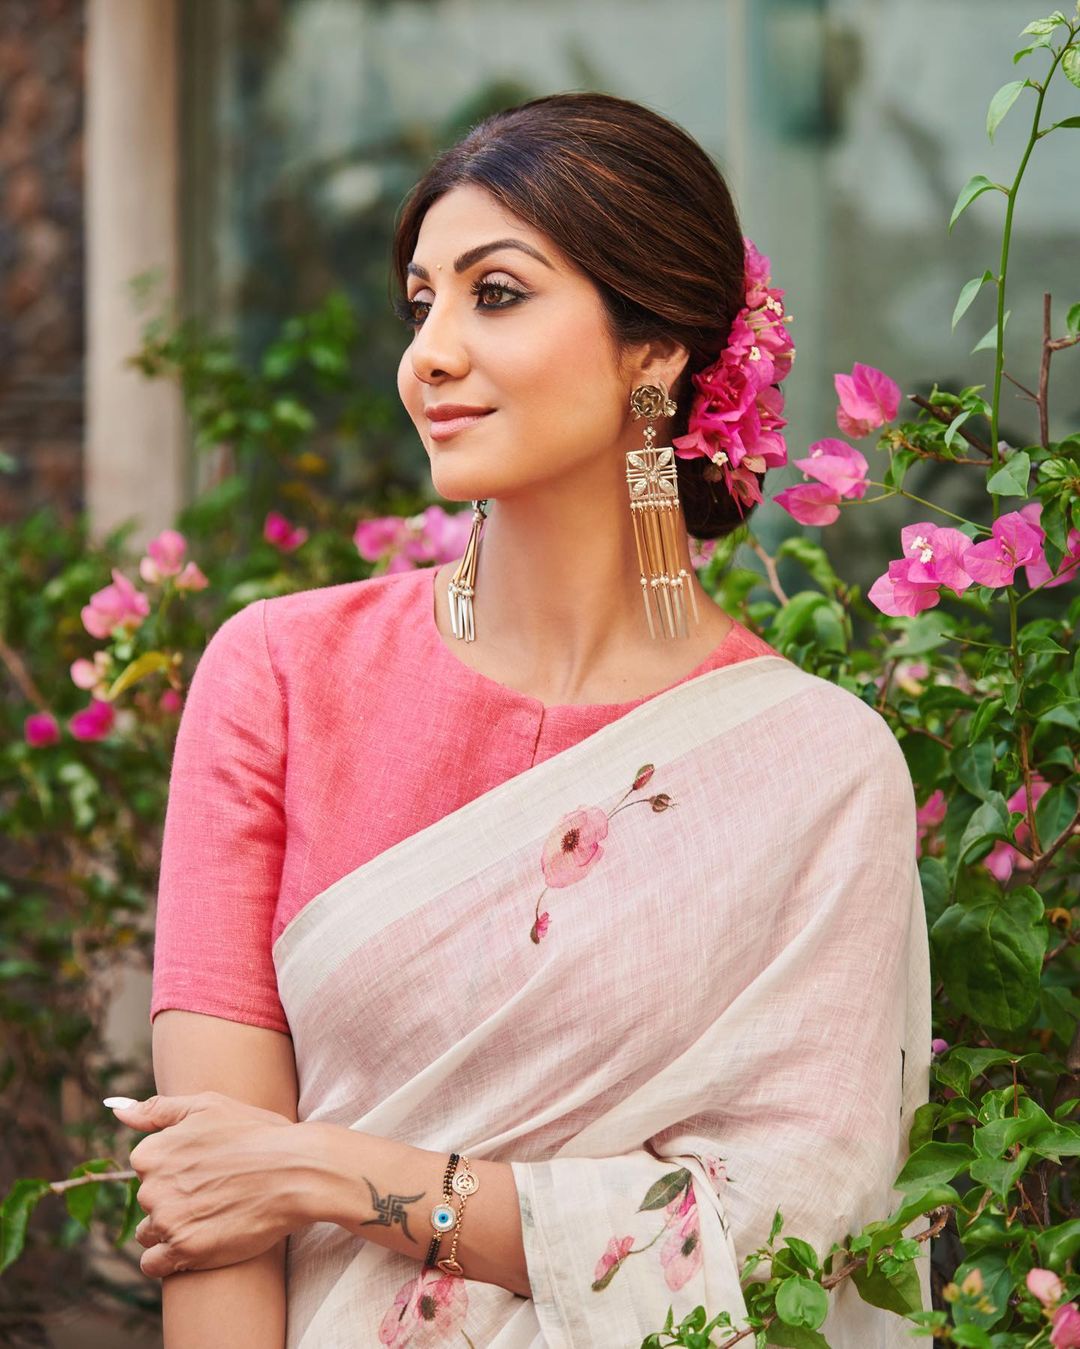 Shilpa Shetty played the magic of beauty in white sarees, see photos 9844